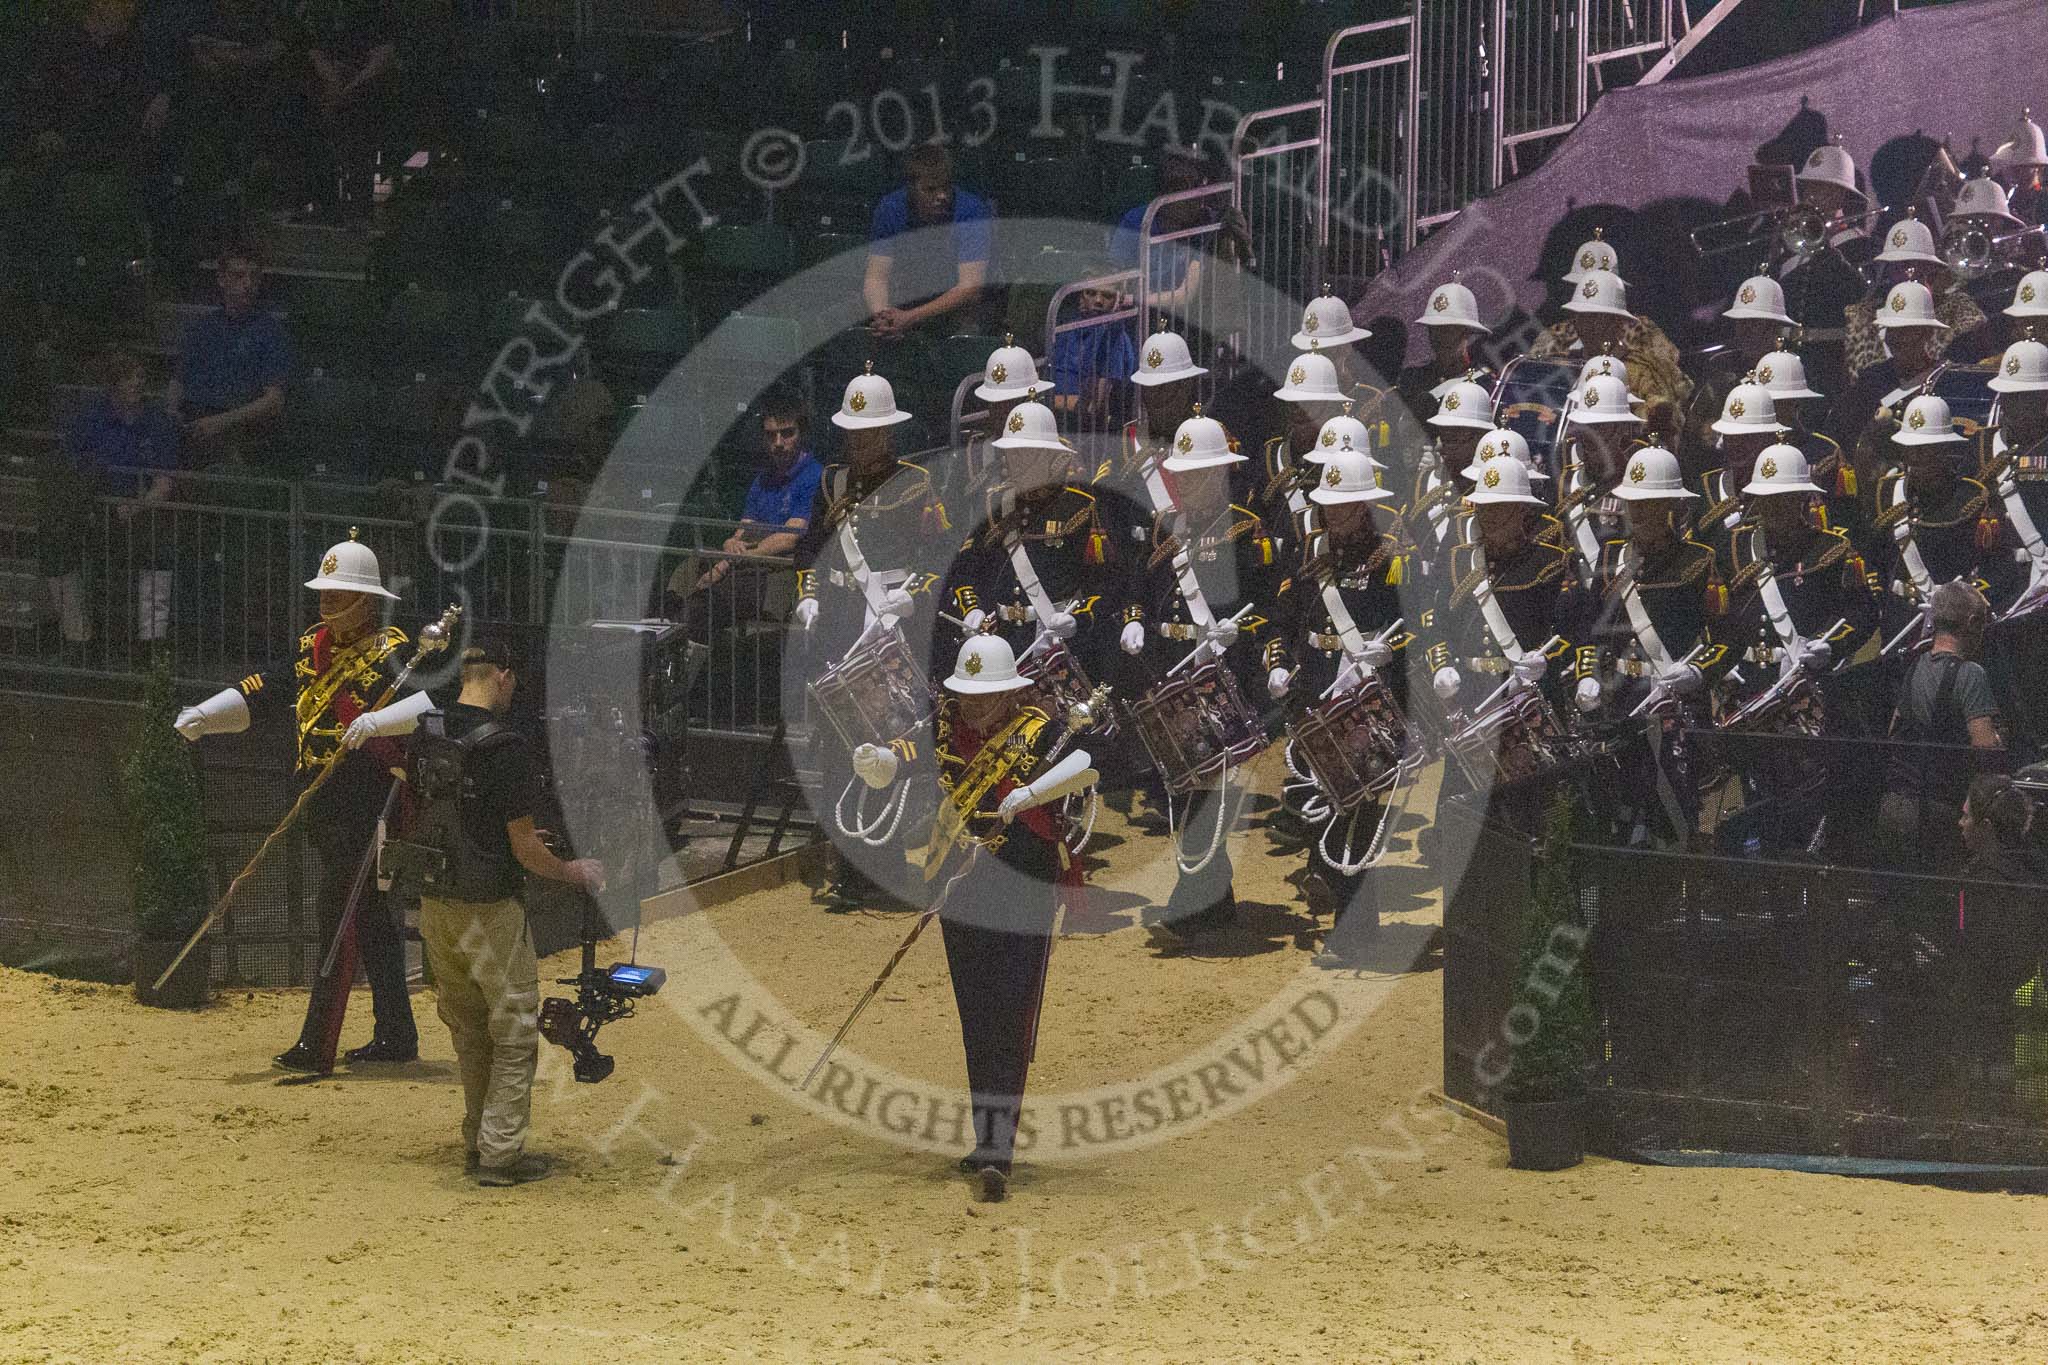 British Military Tournament 2013.
Earls Court,
London SW5,

United Kingdom,
on 06 December 2013 at 16:48, image #476